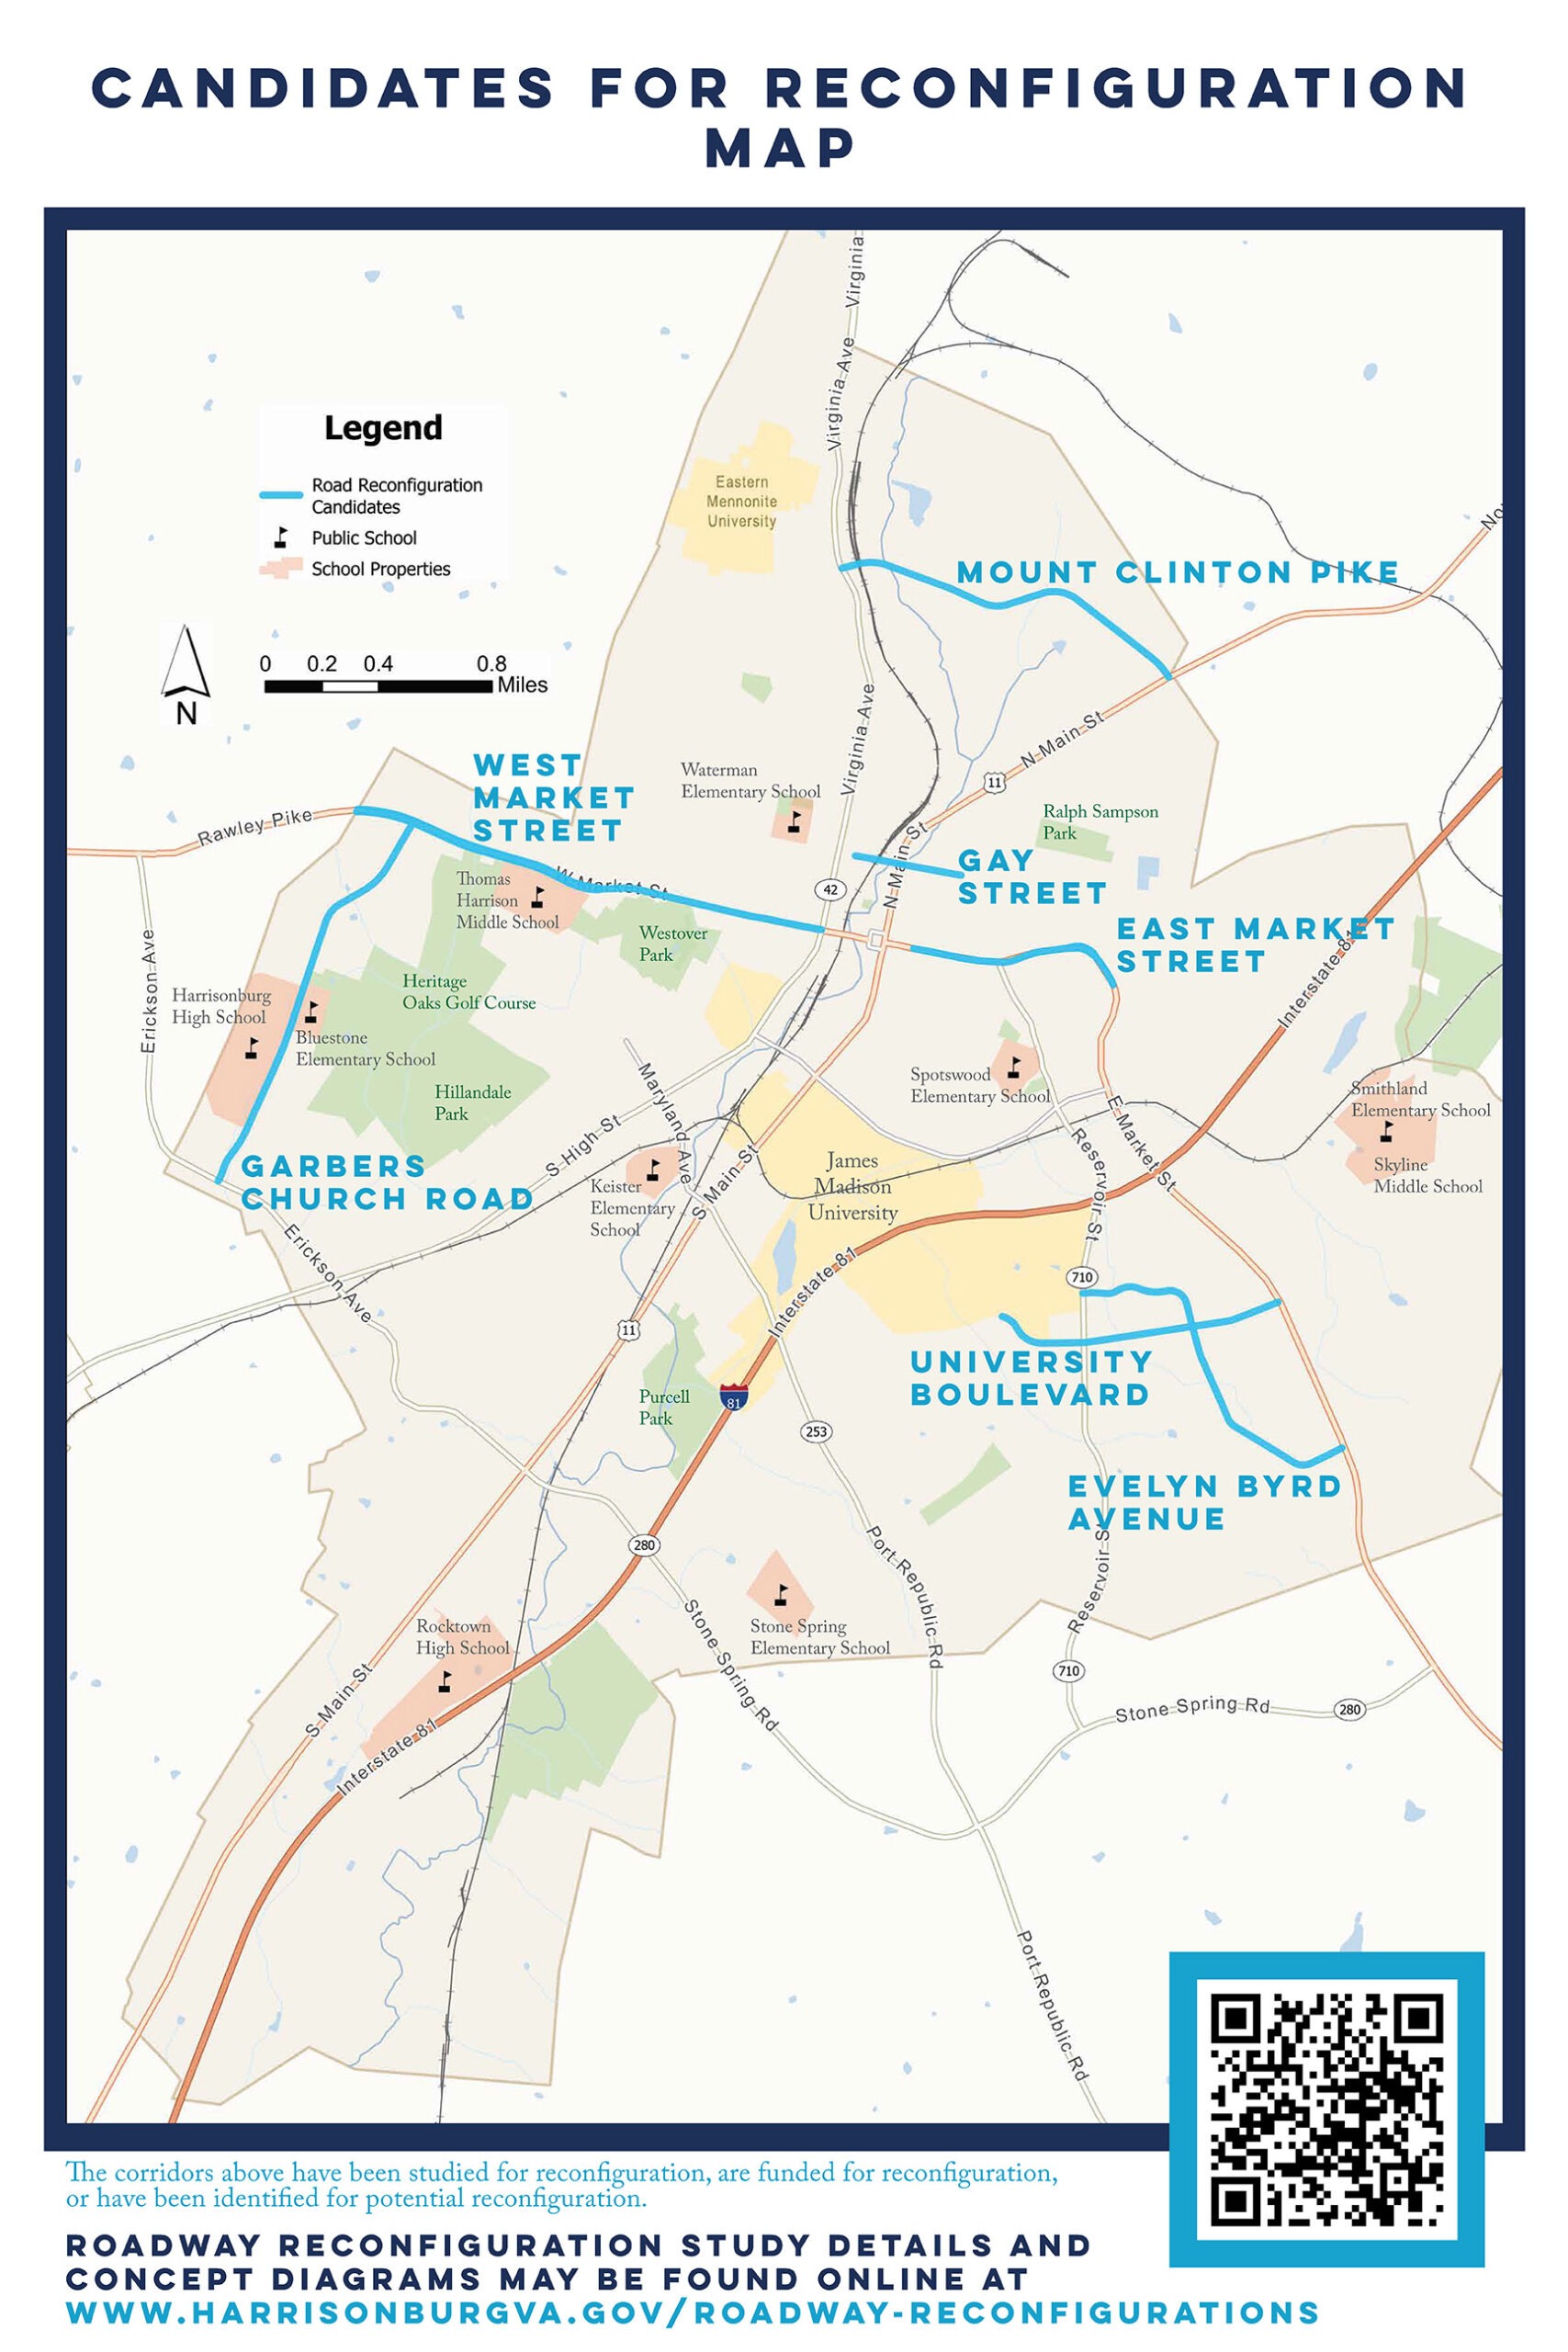 Graphic map of Harrisonburg City showing upcoming road reconfiguration projects.